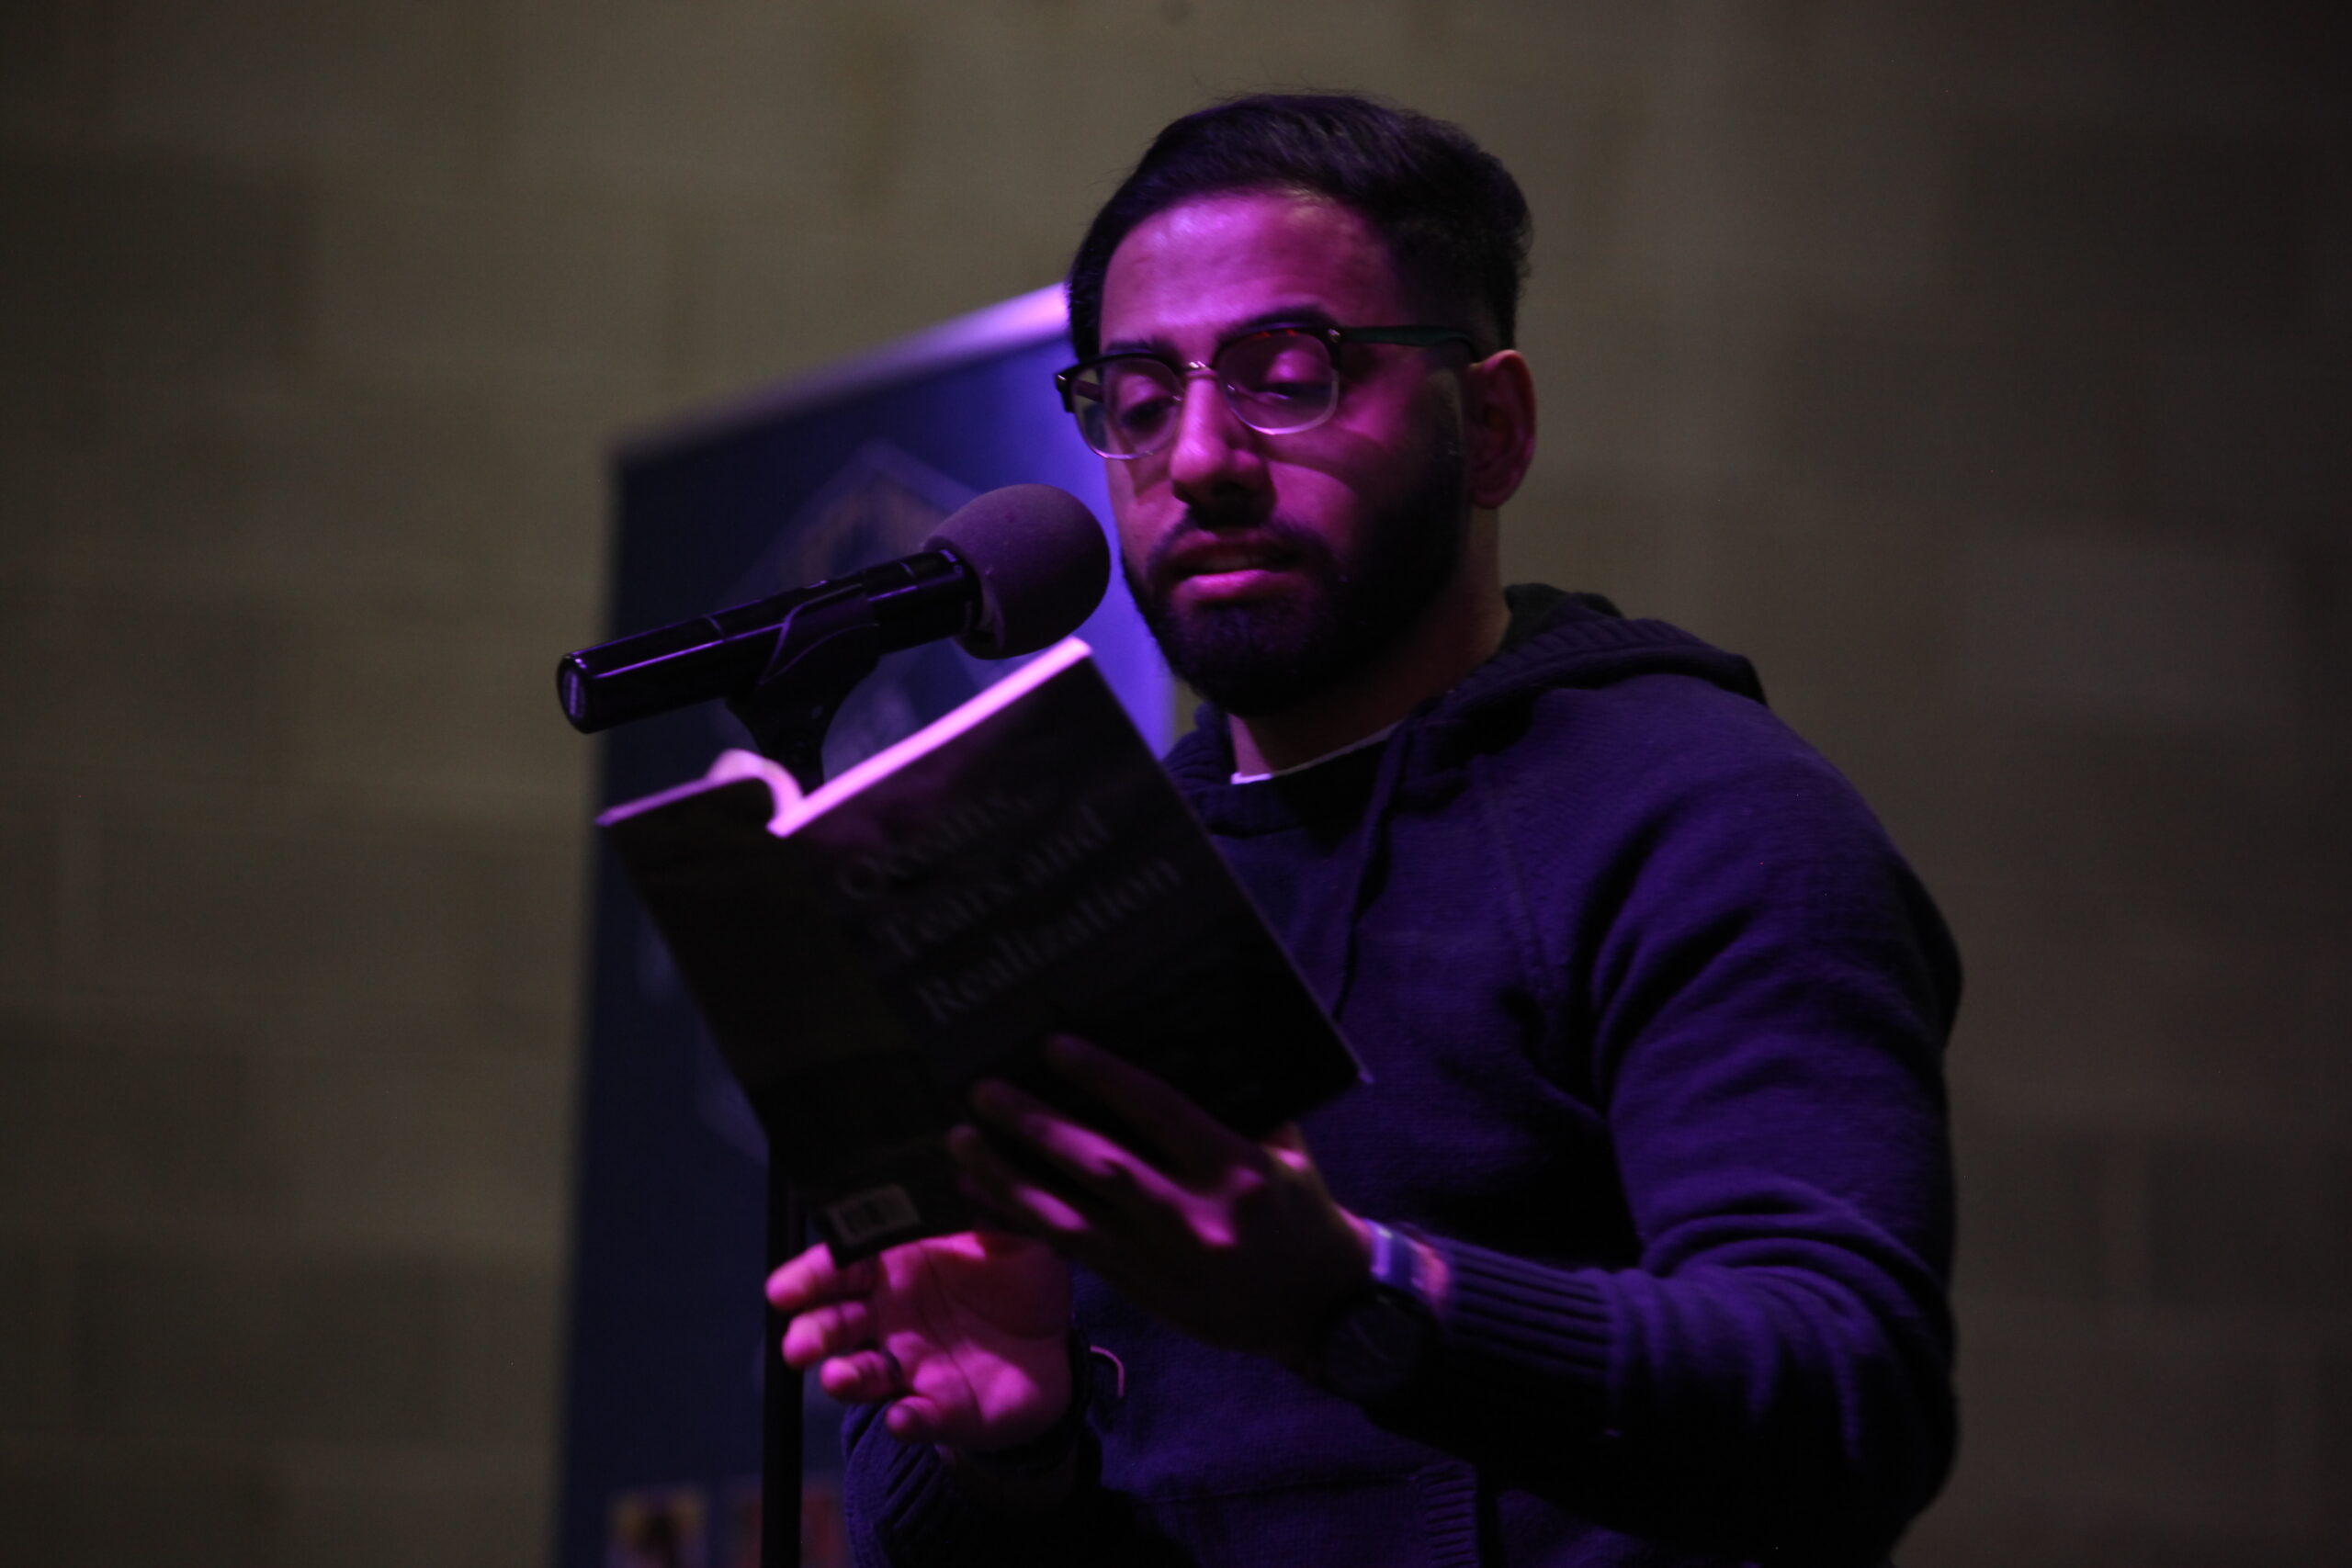 A person reading from a book and standing at a microphone.